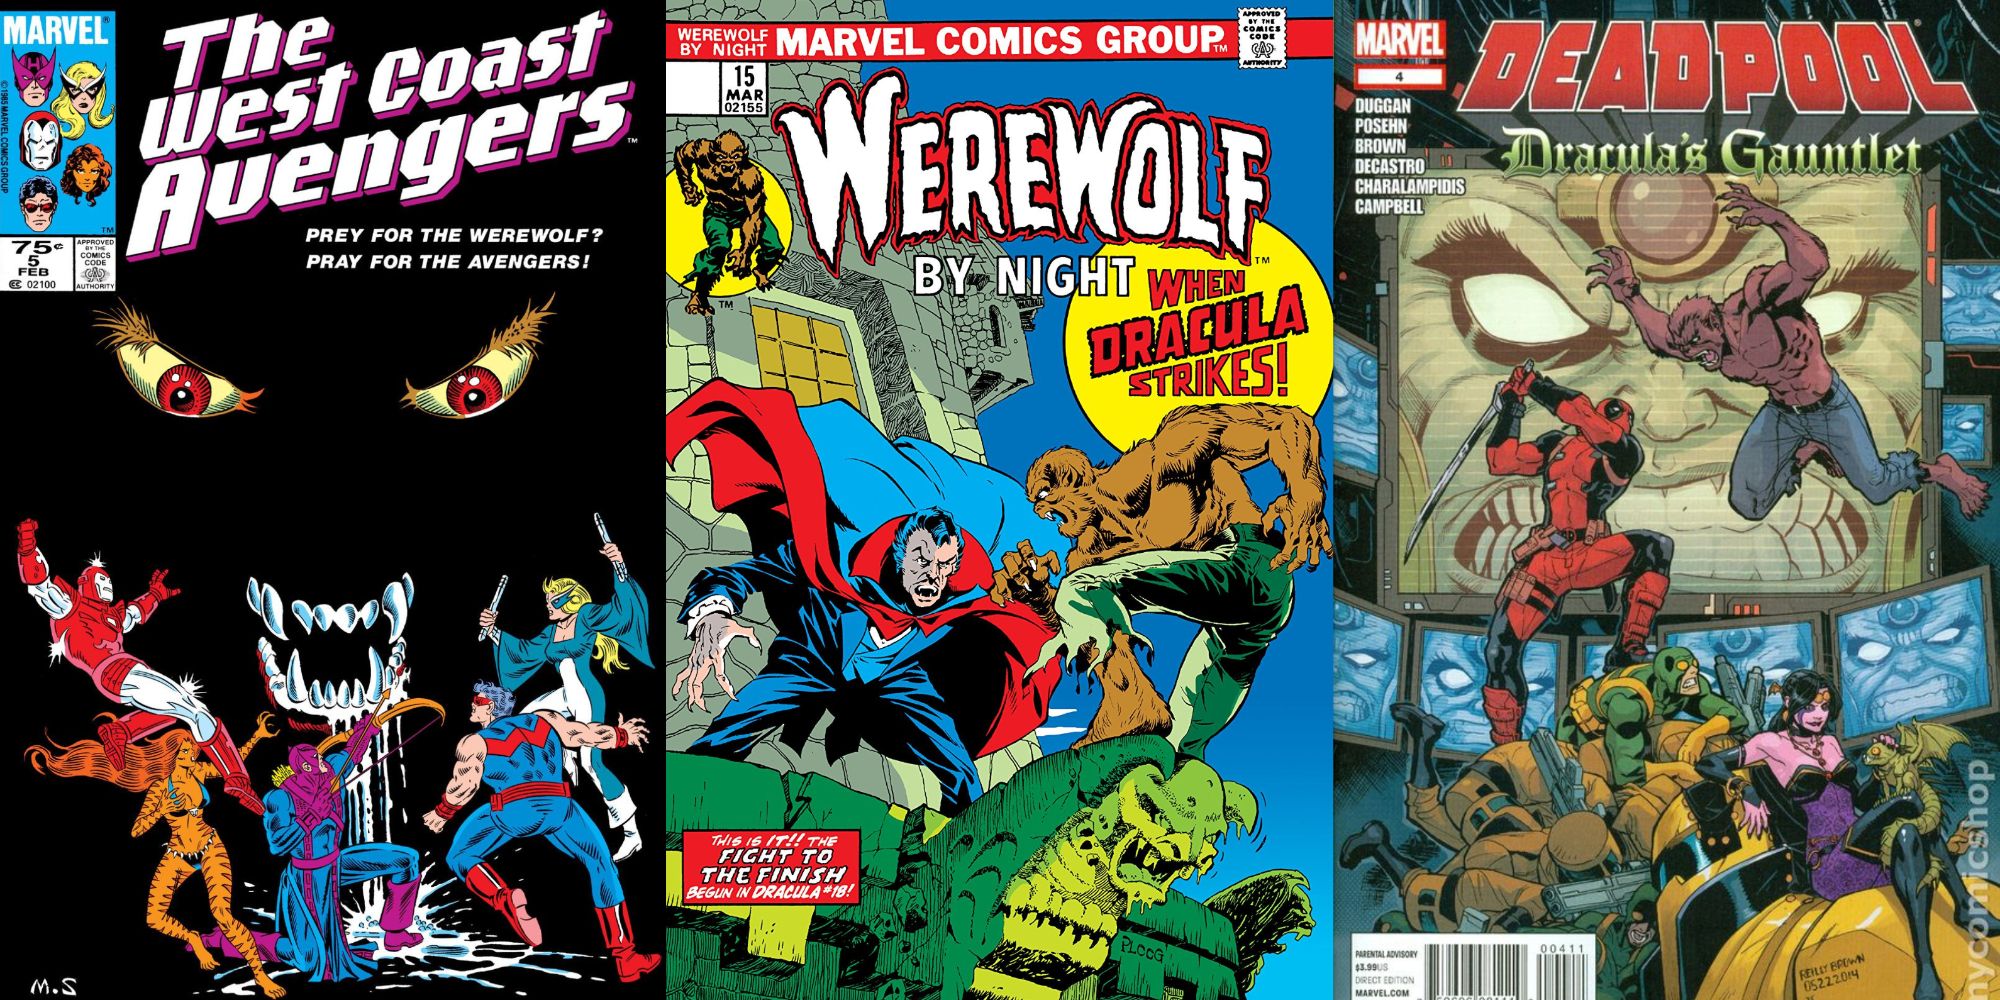 From left to right: the covers of West Coast Avengers Vol 2 #5, Werewolf by Night # 15, and Deadpool: Dracula's Gauntlet #4